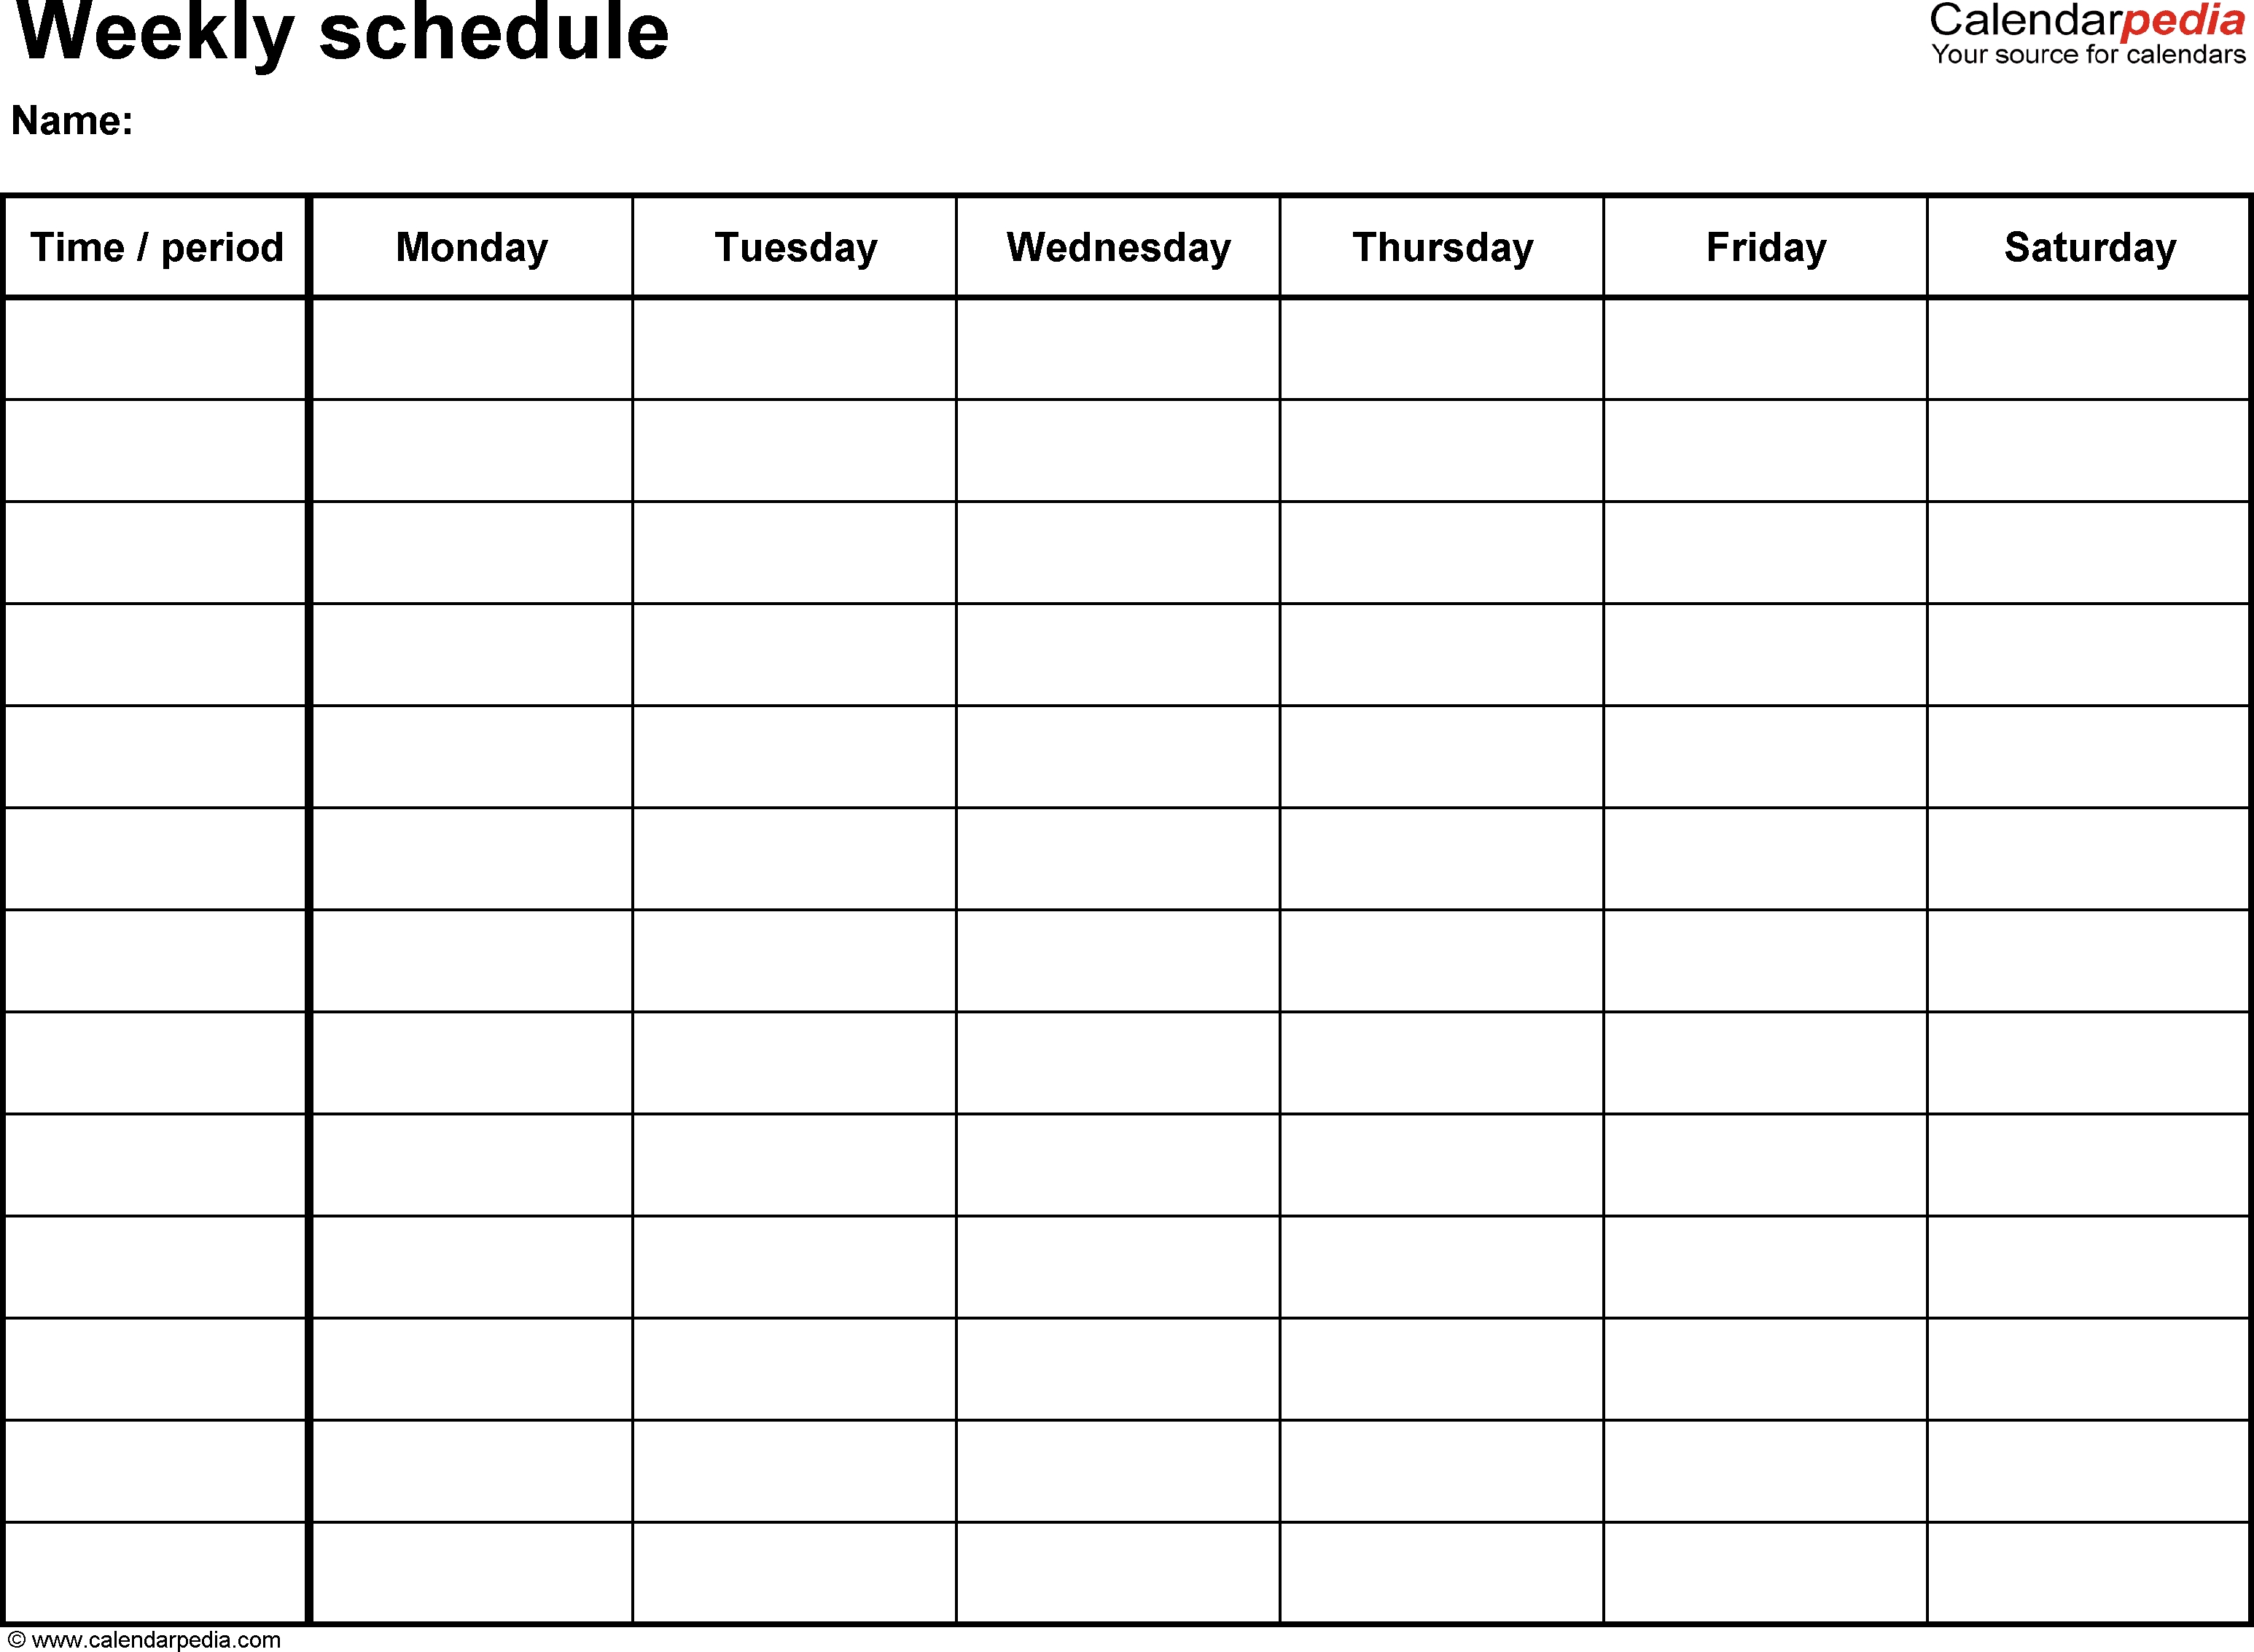 Free Weekly Schedule Templates For Excel - 18 Templates for Time Management Monday To Sunday